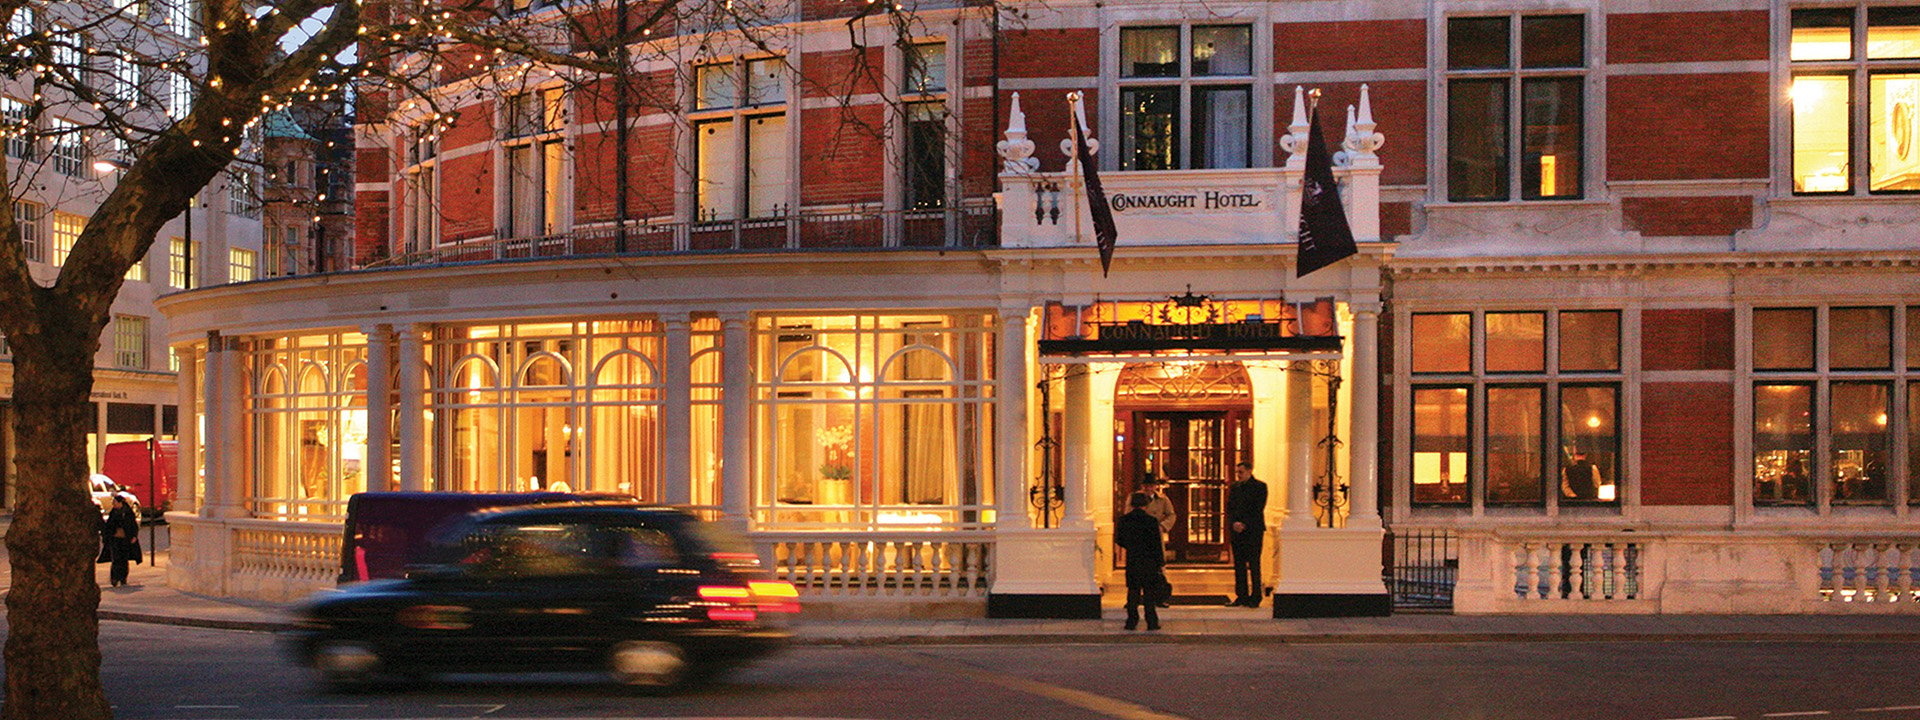 View of The Connaught, from the outside, with a car passing and concierges in front.